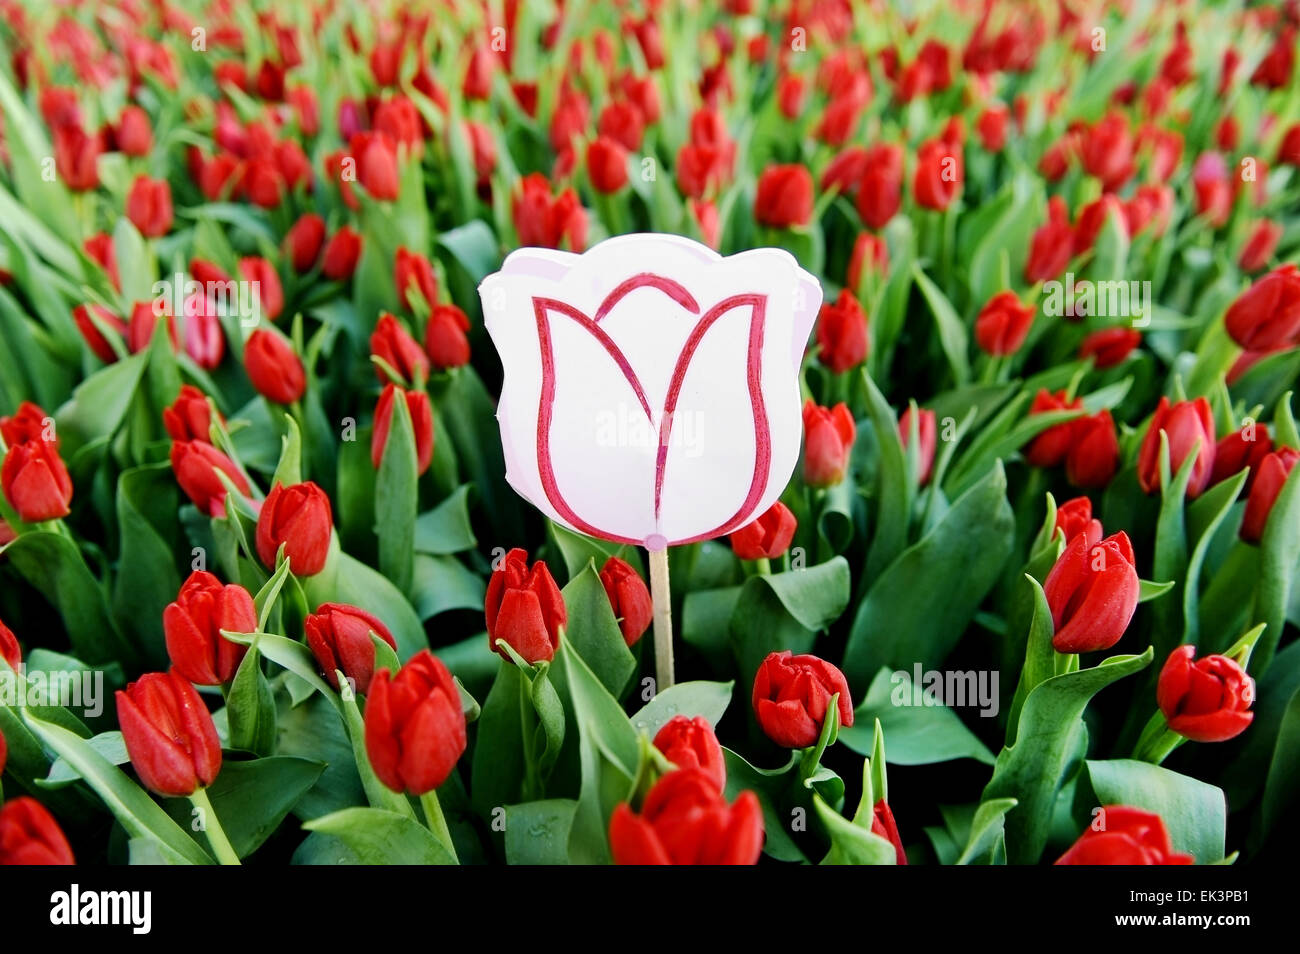 A cardboard tulip symbolizing a message in a natural red tulip field Stock Photo